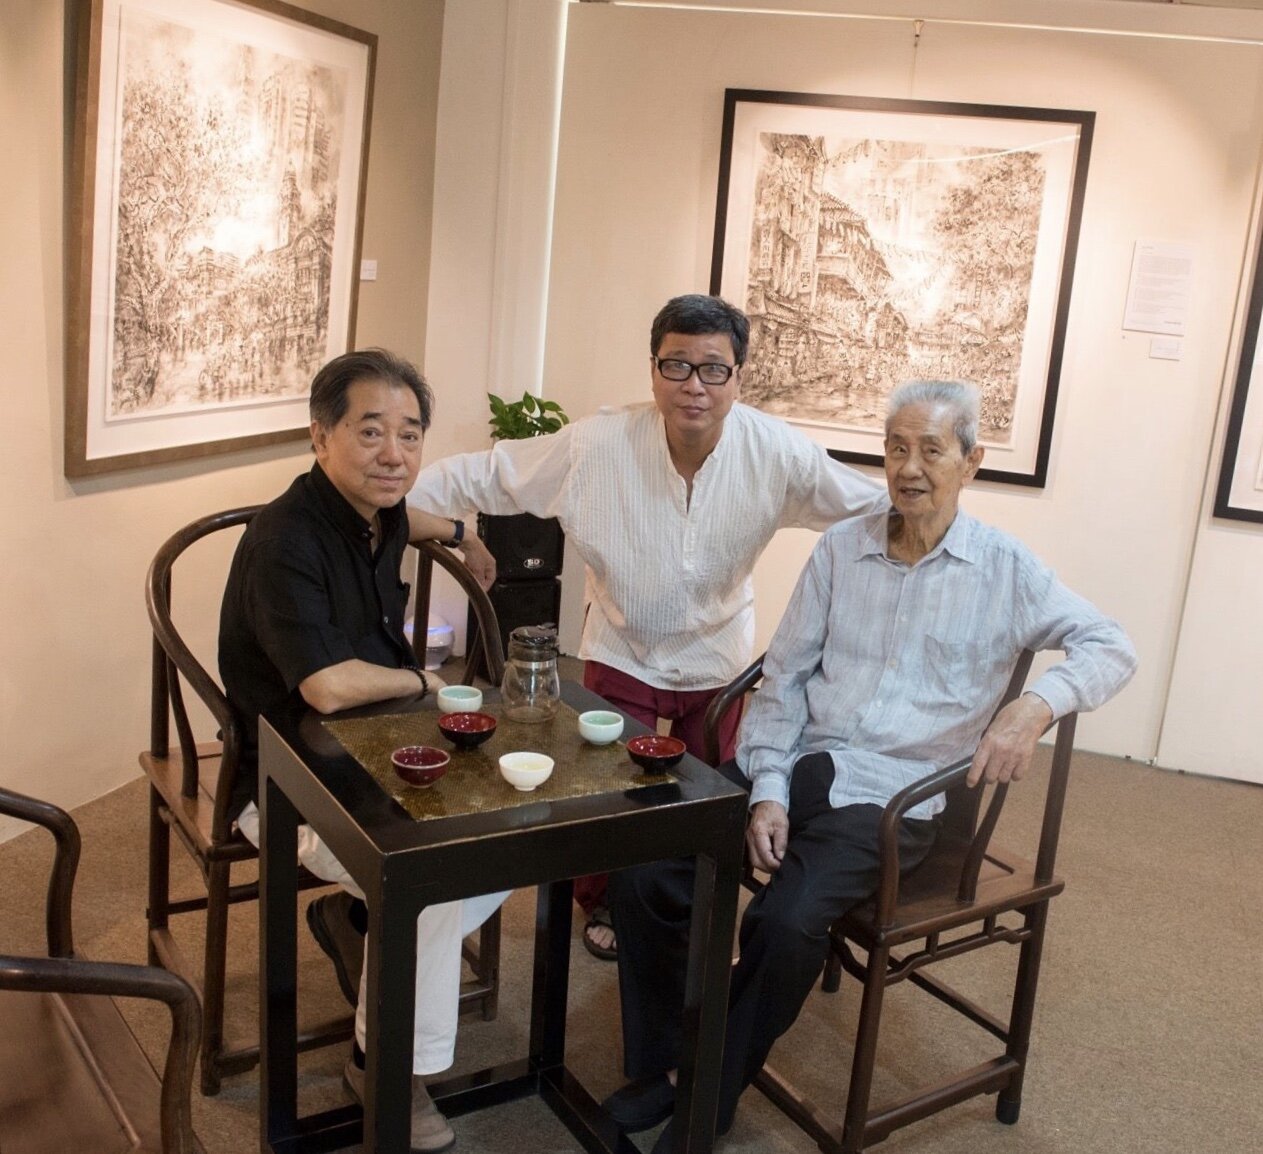 Mr Lim Tze Peng visiting Mr Tung Yue Nang's solo exhibition